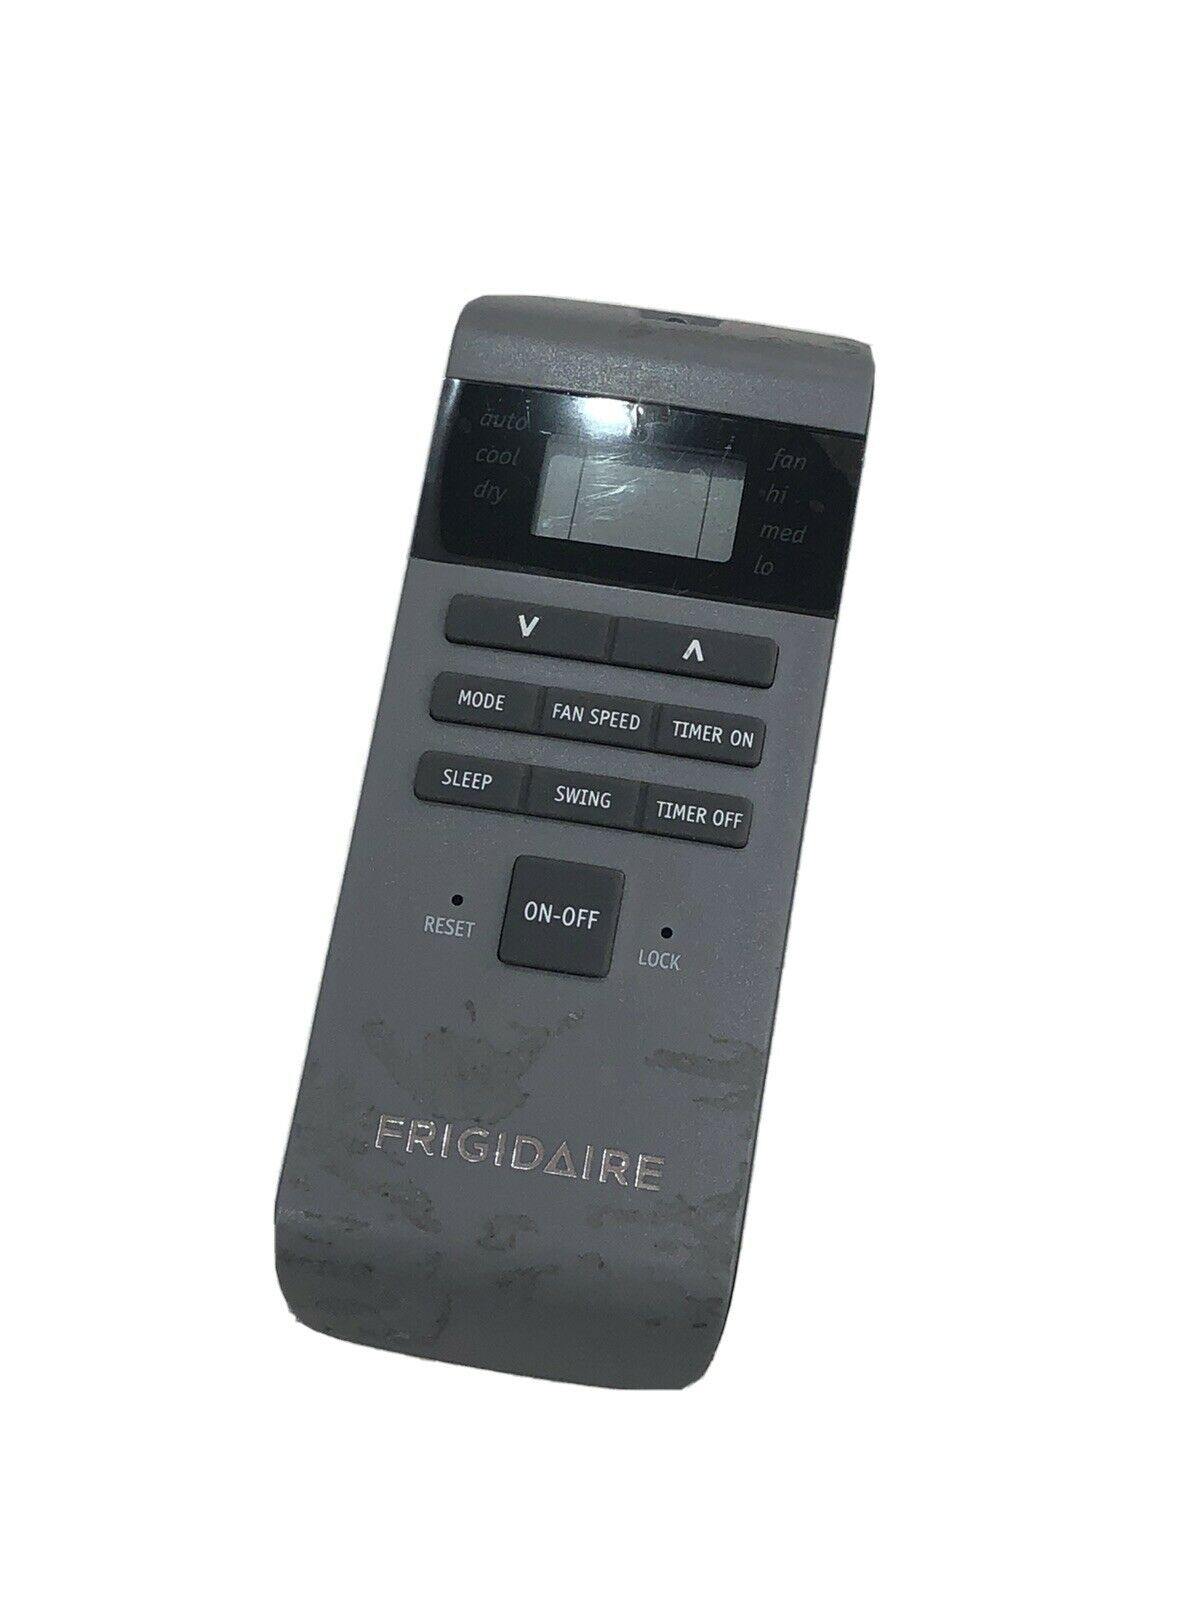 Replacement Remote for Frigidaire - Model: Z13 - China Air Conditioner Remotes :: Cheapest AC Remote Solutions